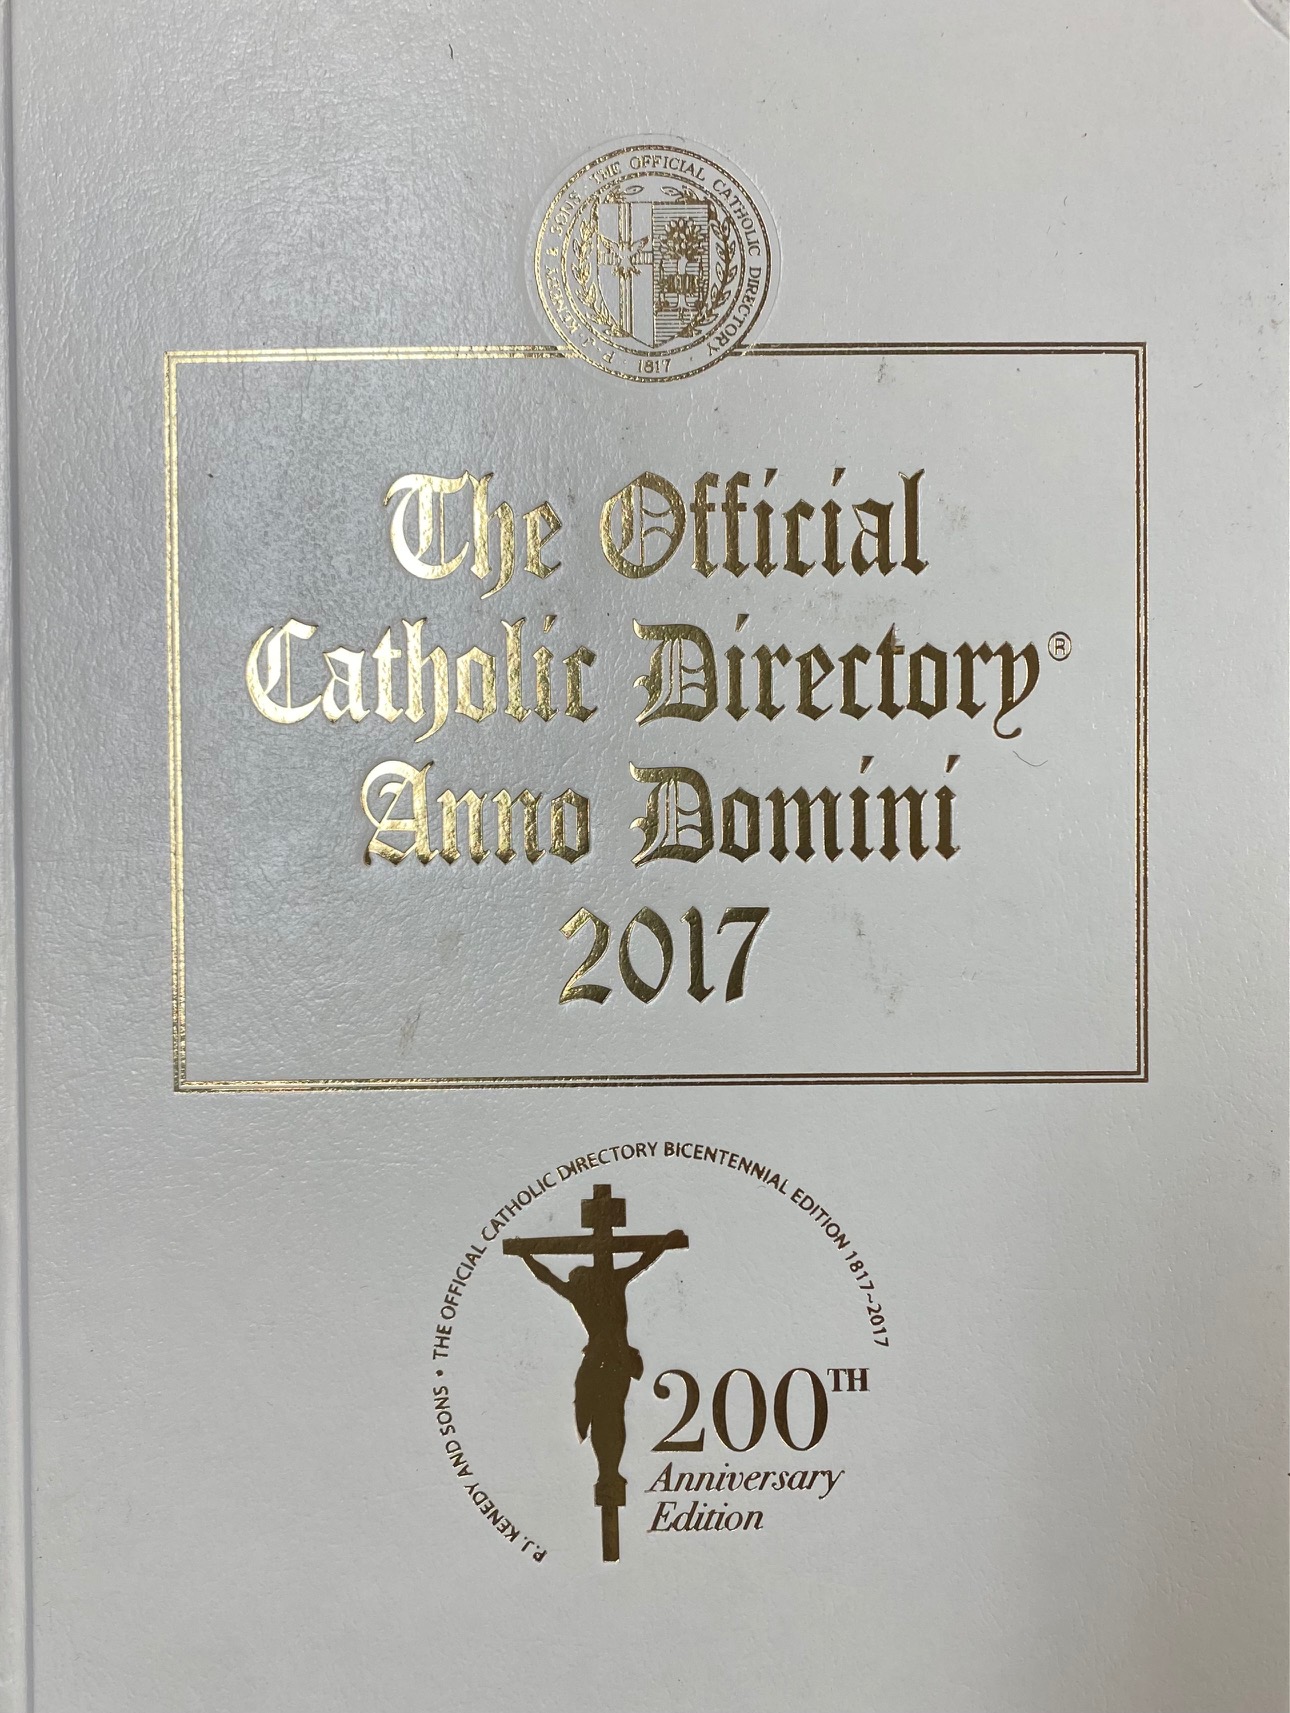 The Official Catholic Directory 2017 Anno Domini 2017